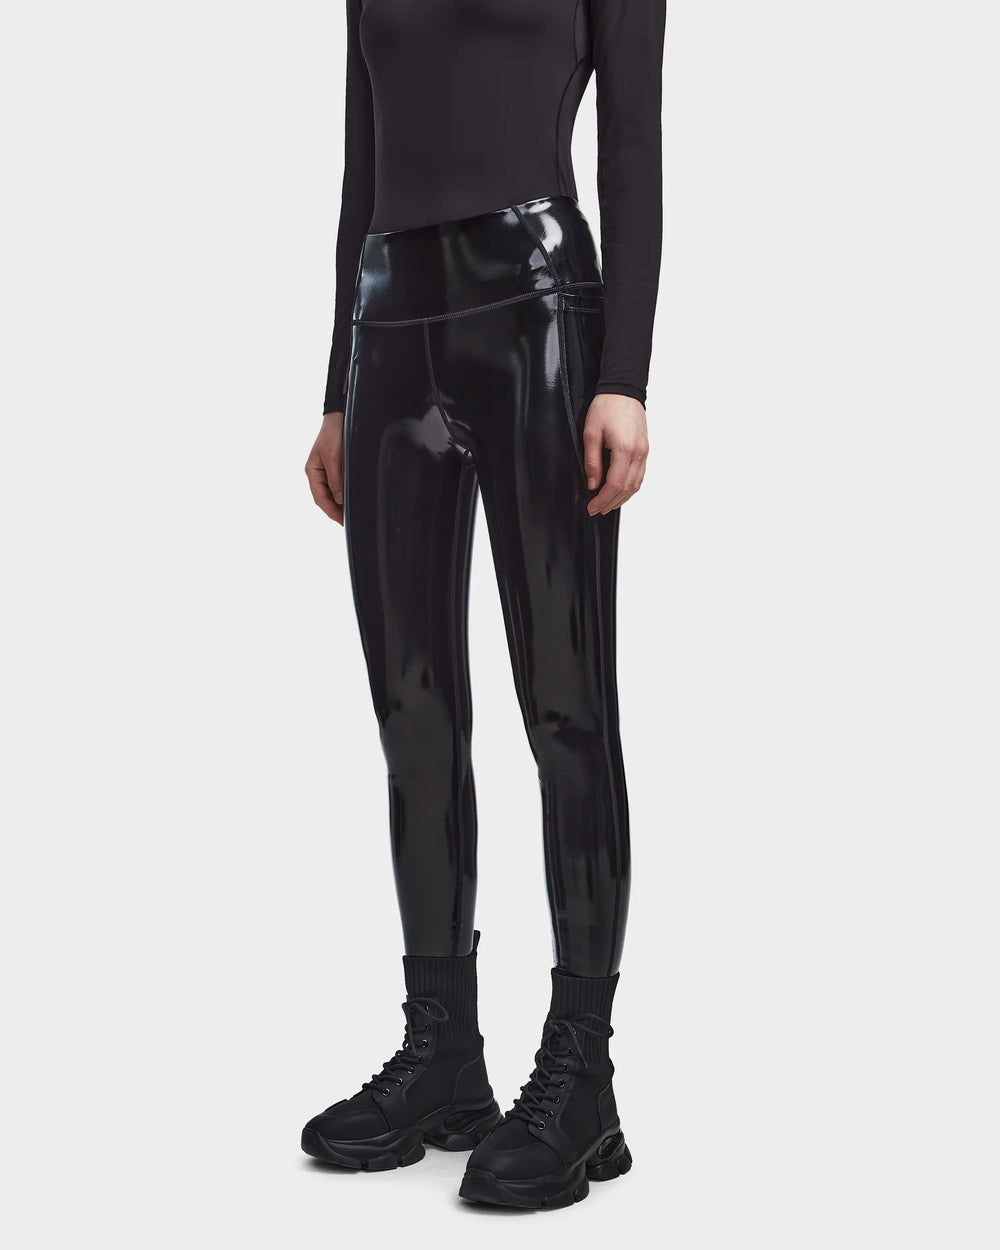 Stretch Leather Pants, Genuine Leather Leggings, Black Leather Tights  Genuine Leather Woman Fashion Clothing -  Canada